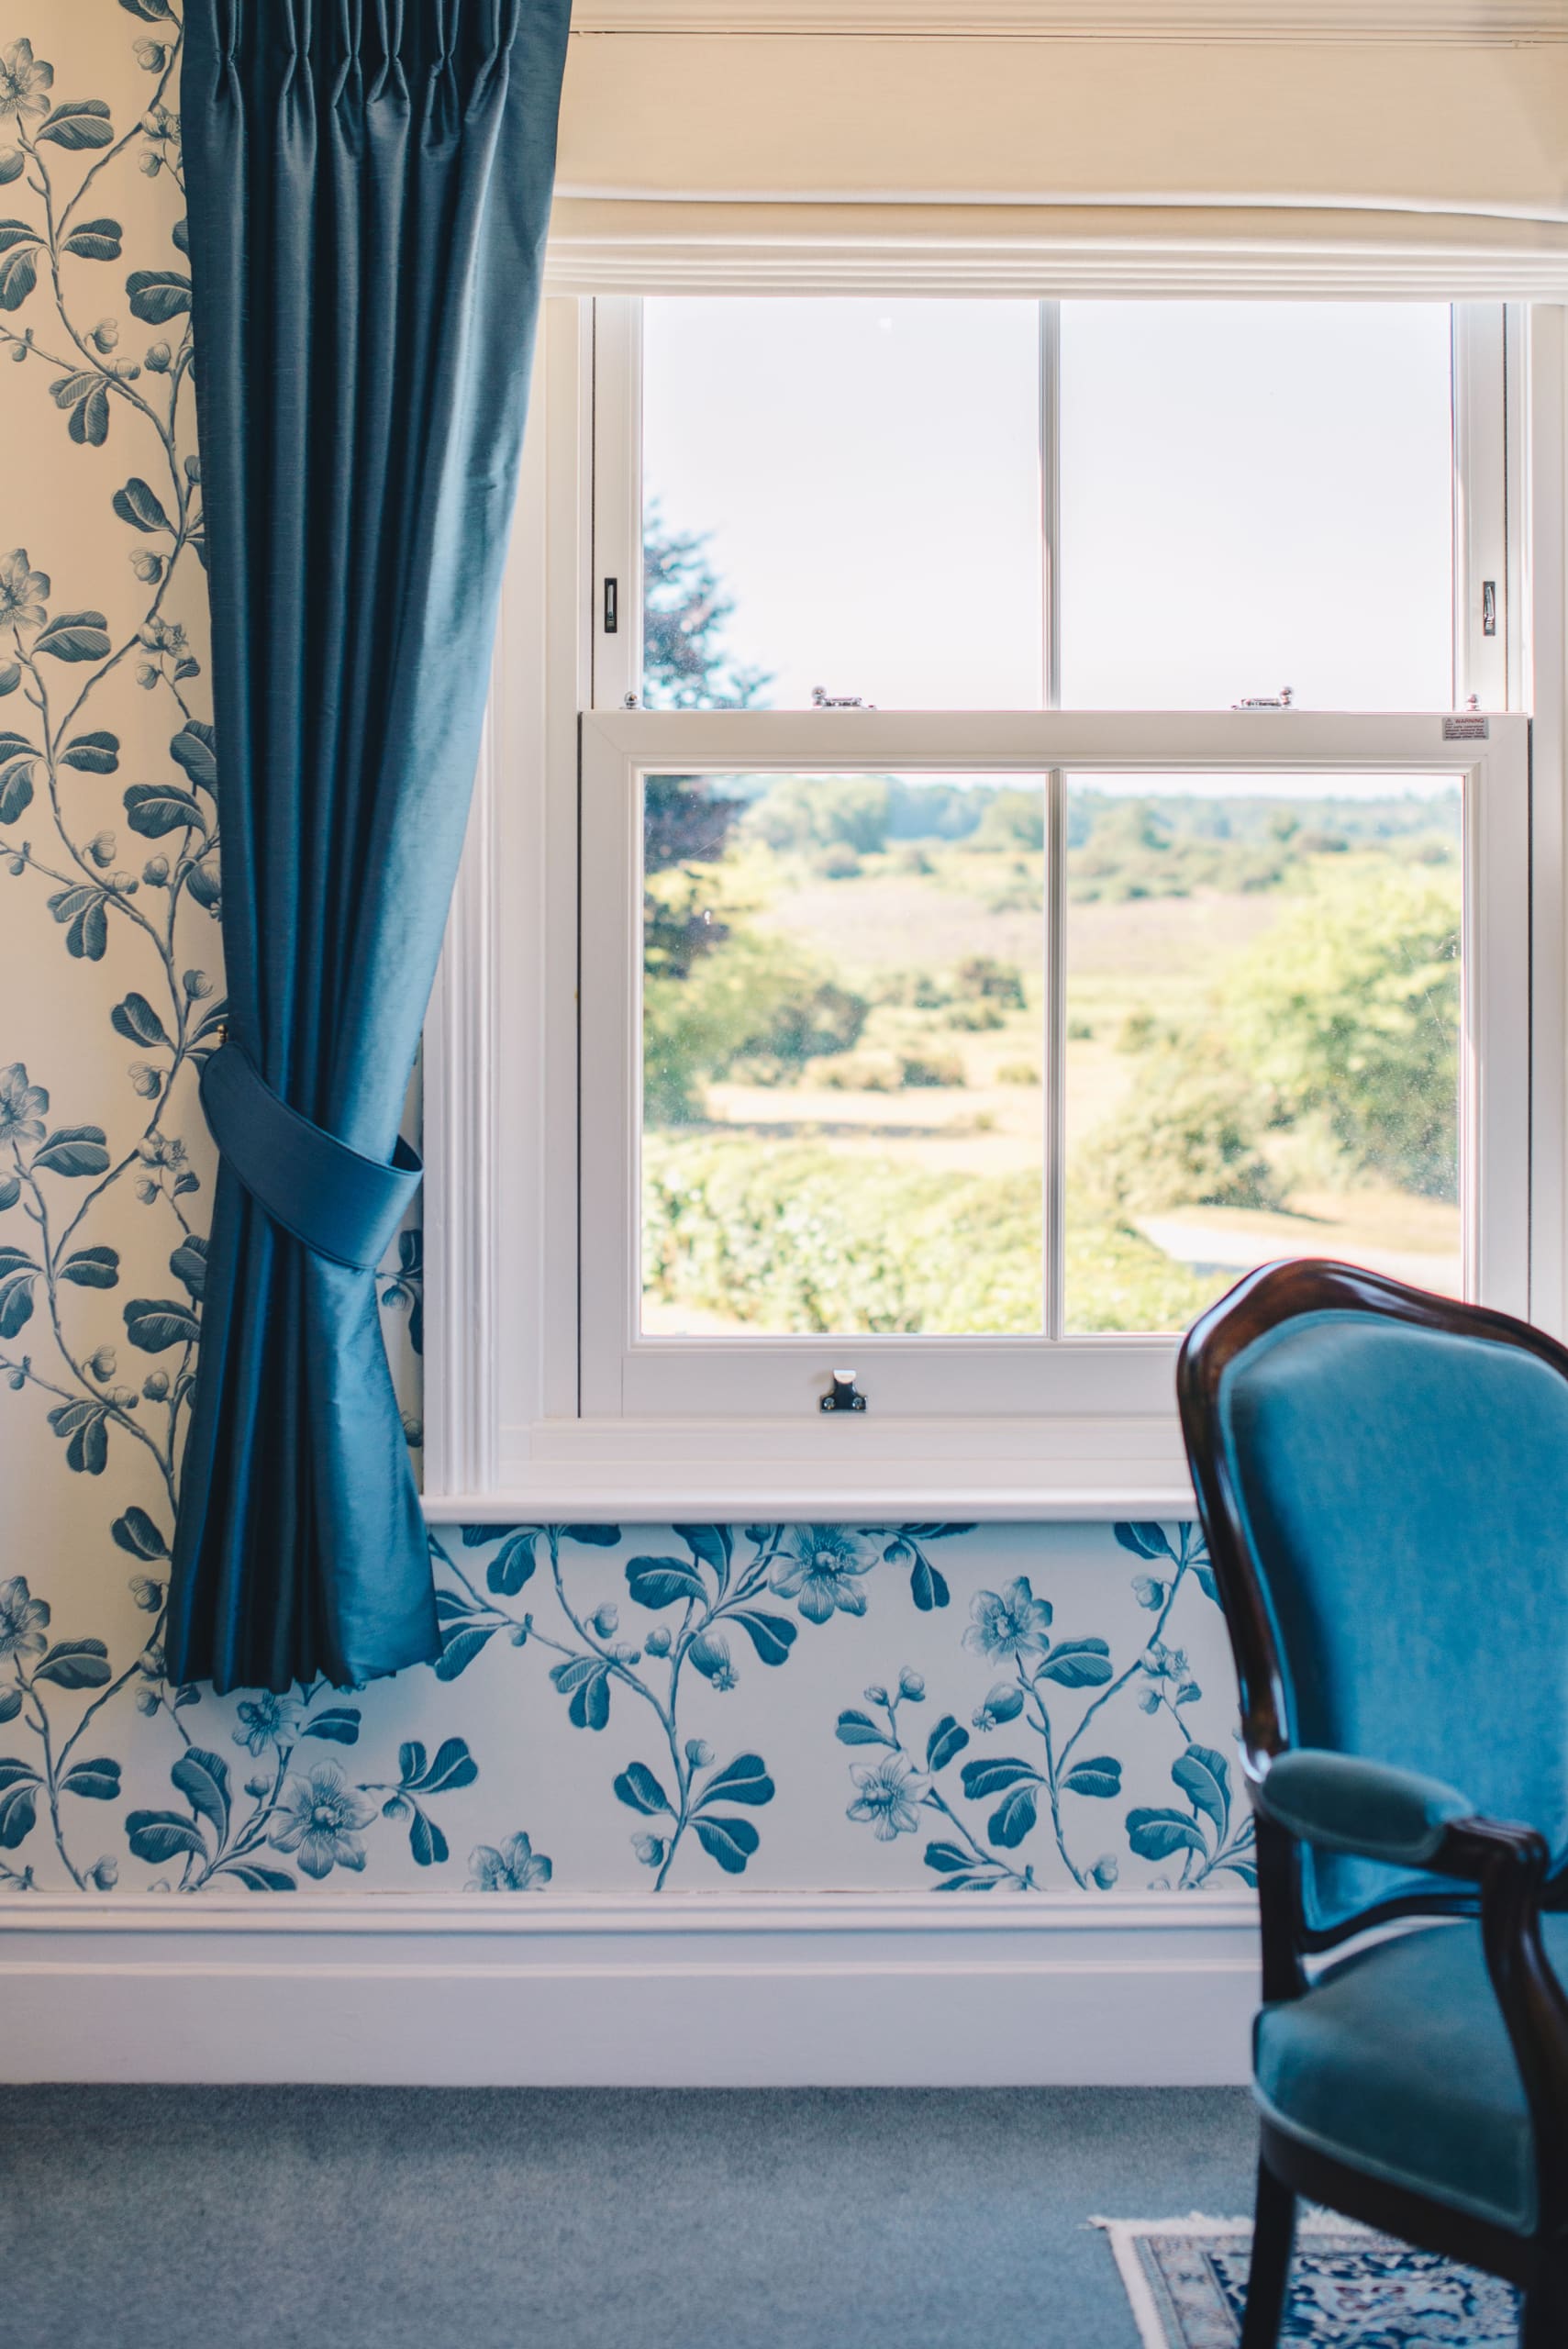 Beautiful traditional home with blue rococo style armchairs and sash windows complete with blue curtains and floral wallpaper.